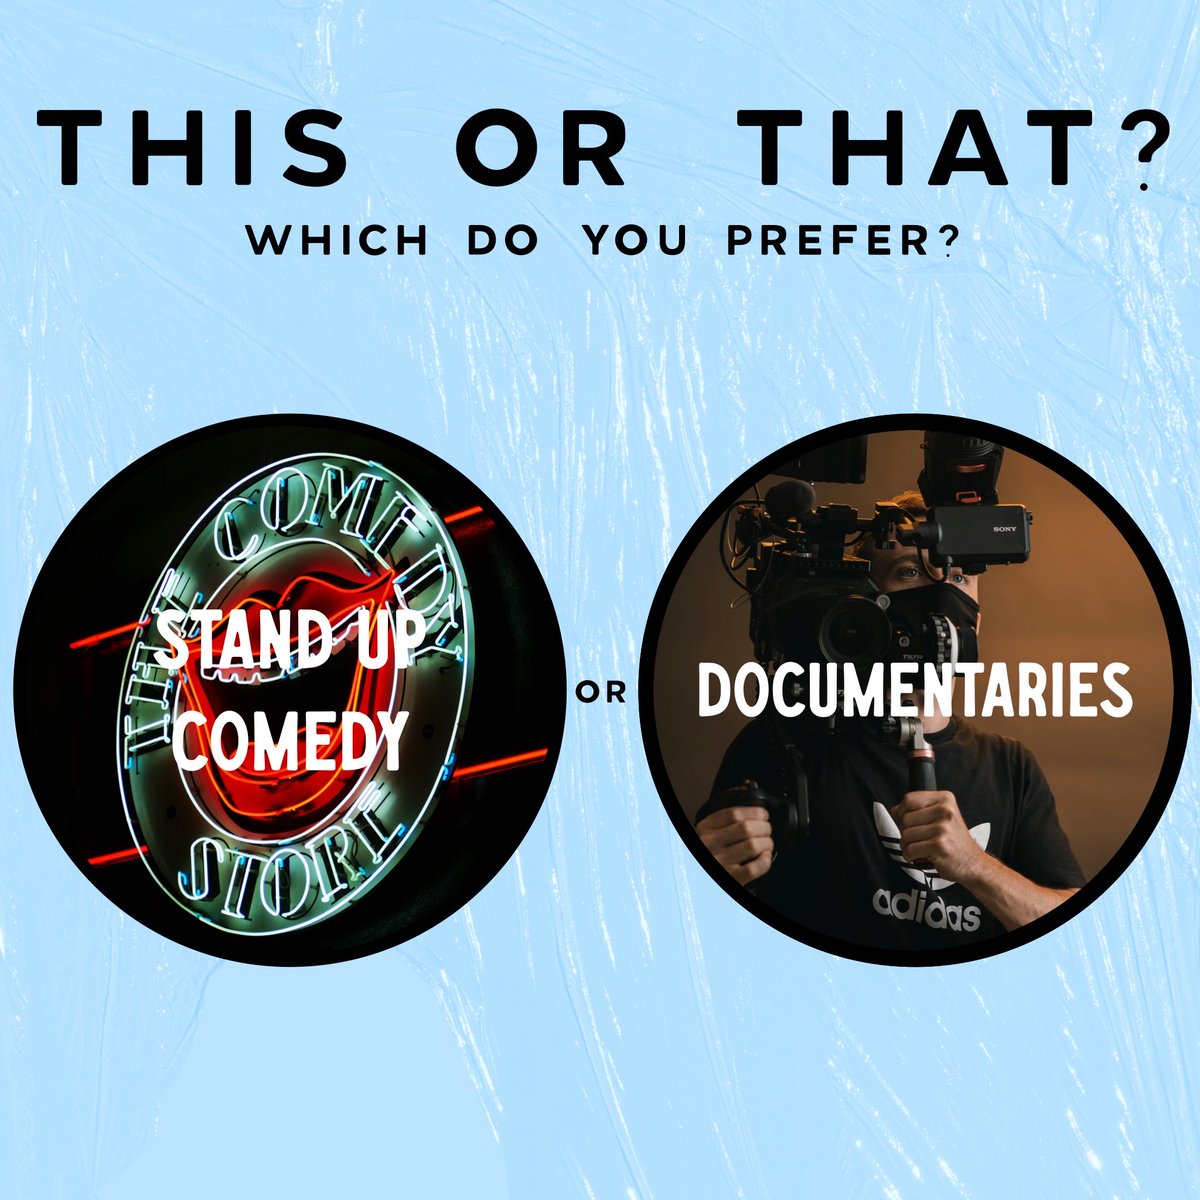 Which do you prefer? Let us know in the comments! #acop #americanconsumeropinion #surveysformoney #thisorthat #documentary #standup #comedian